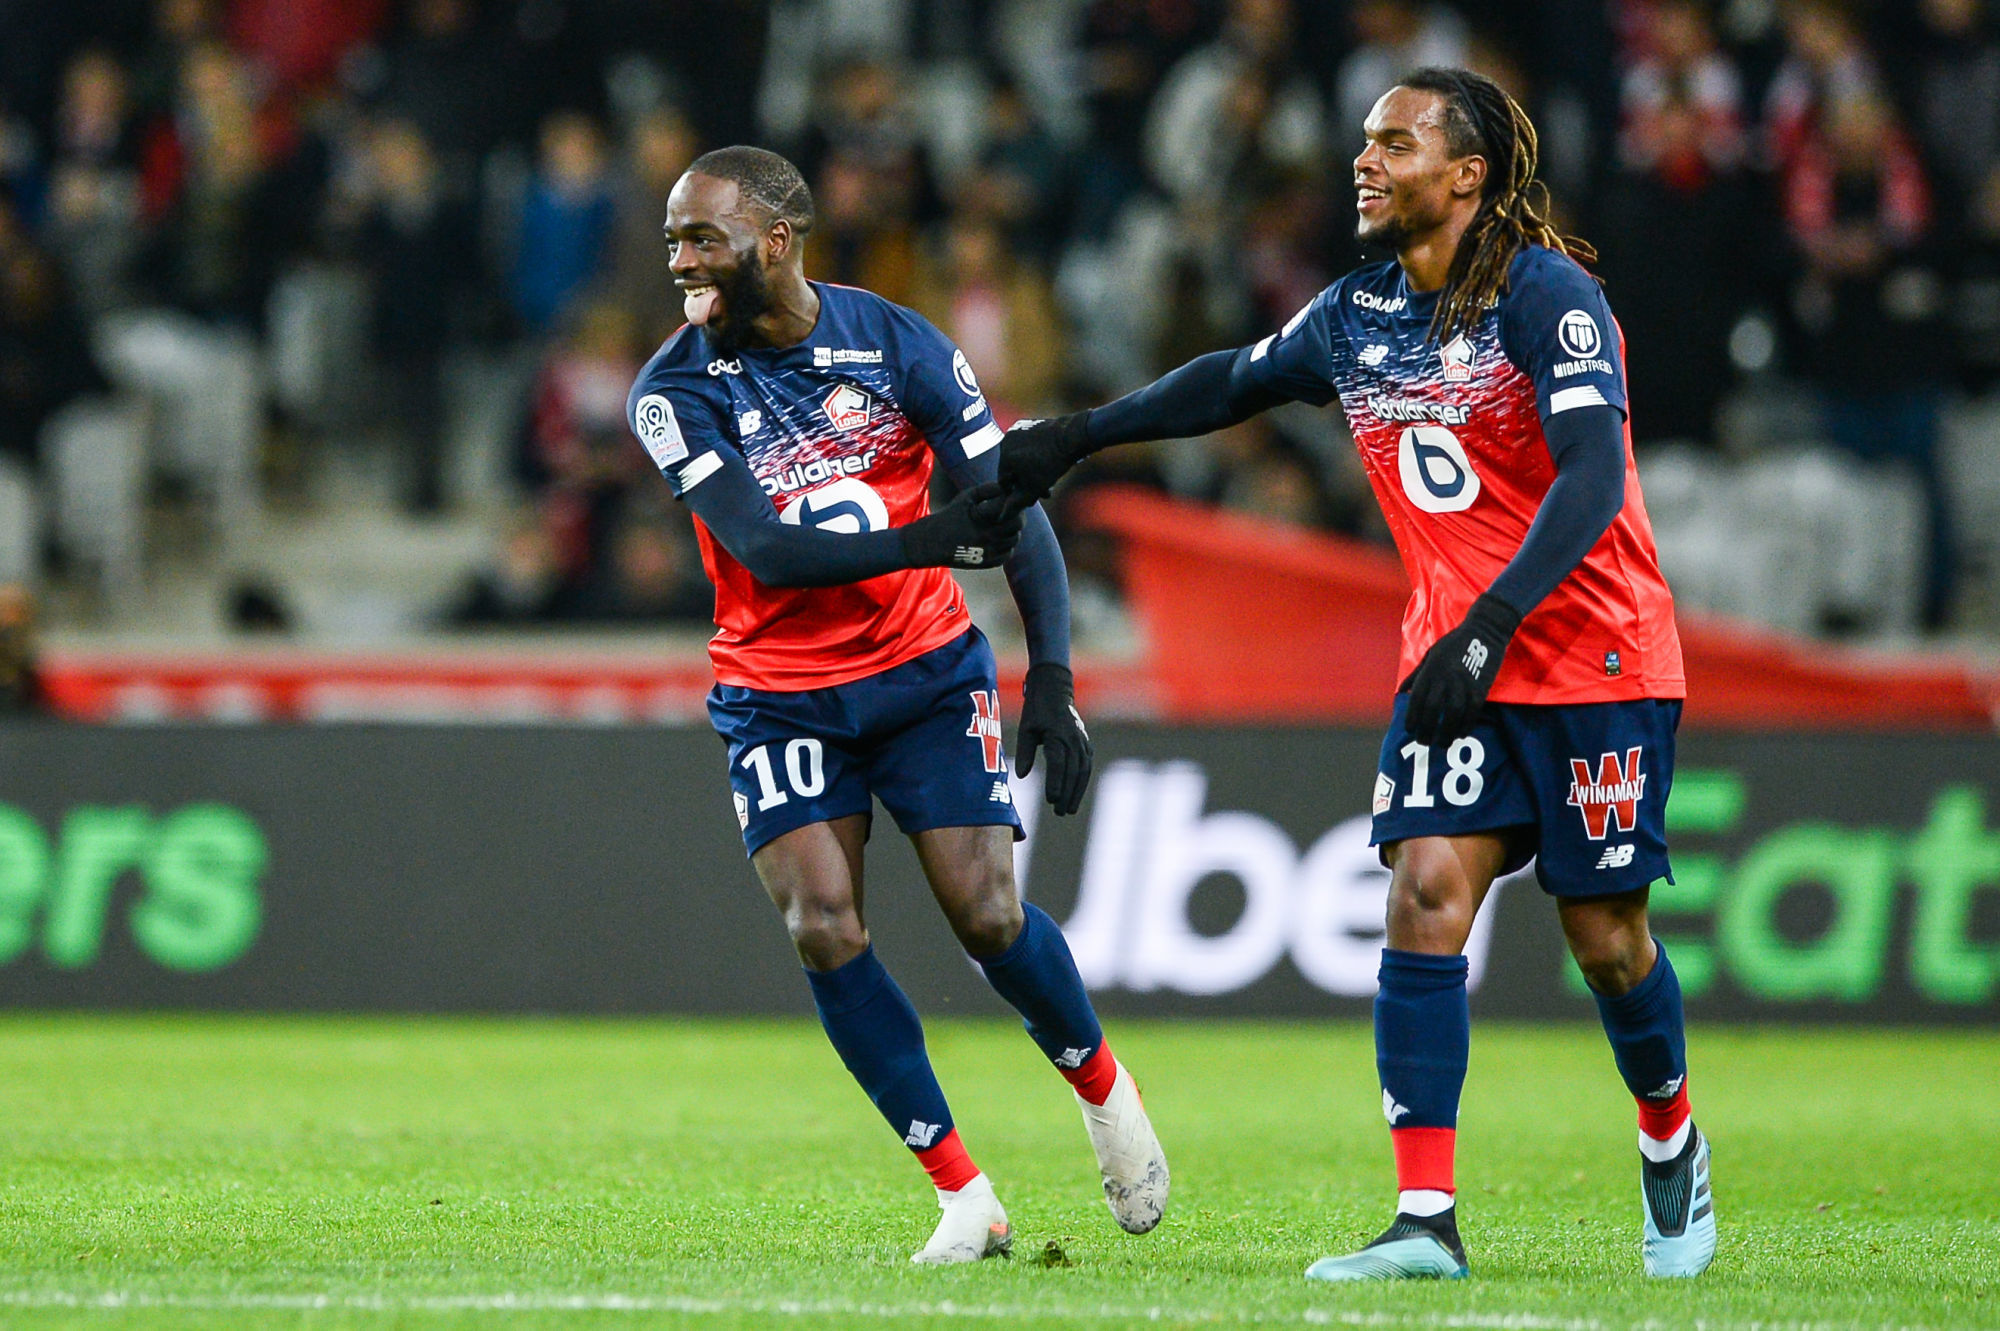 Jonathan IKONE of Lille celebrates his goal with Renato SANCHES of Lille  during the French Ligue 1 soccer match between Lille OSC and Montpellier HSC at Stade Pierre Mauroy on December 13, 2019 in Lille, France. (Photo by Baptiste Fernandez/Icon Sport) - Stade Pierre Mauroy - Lille (France)